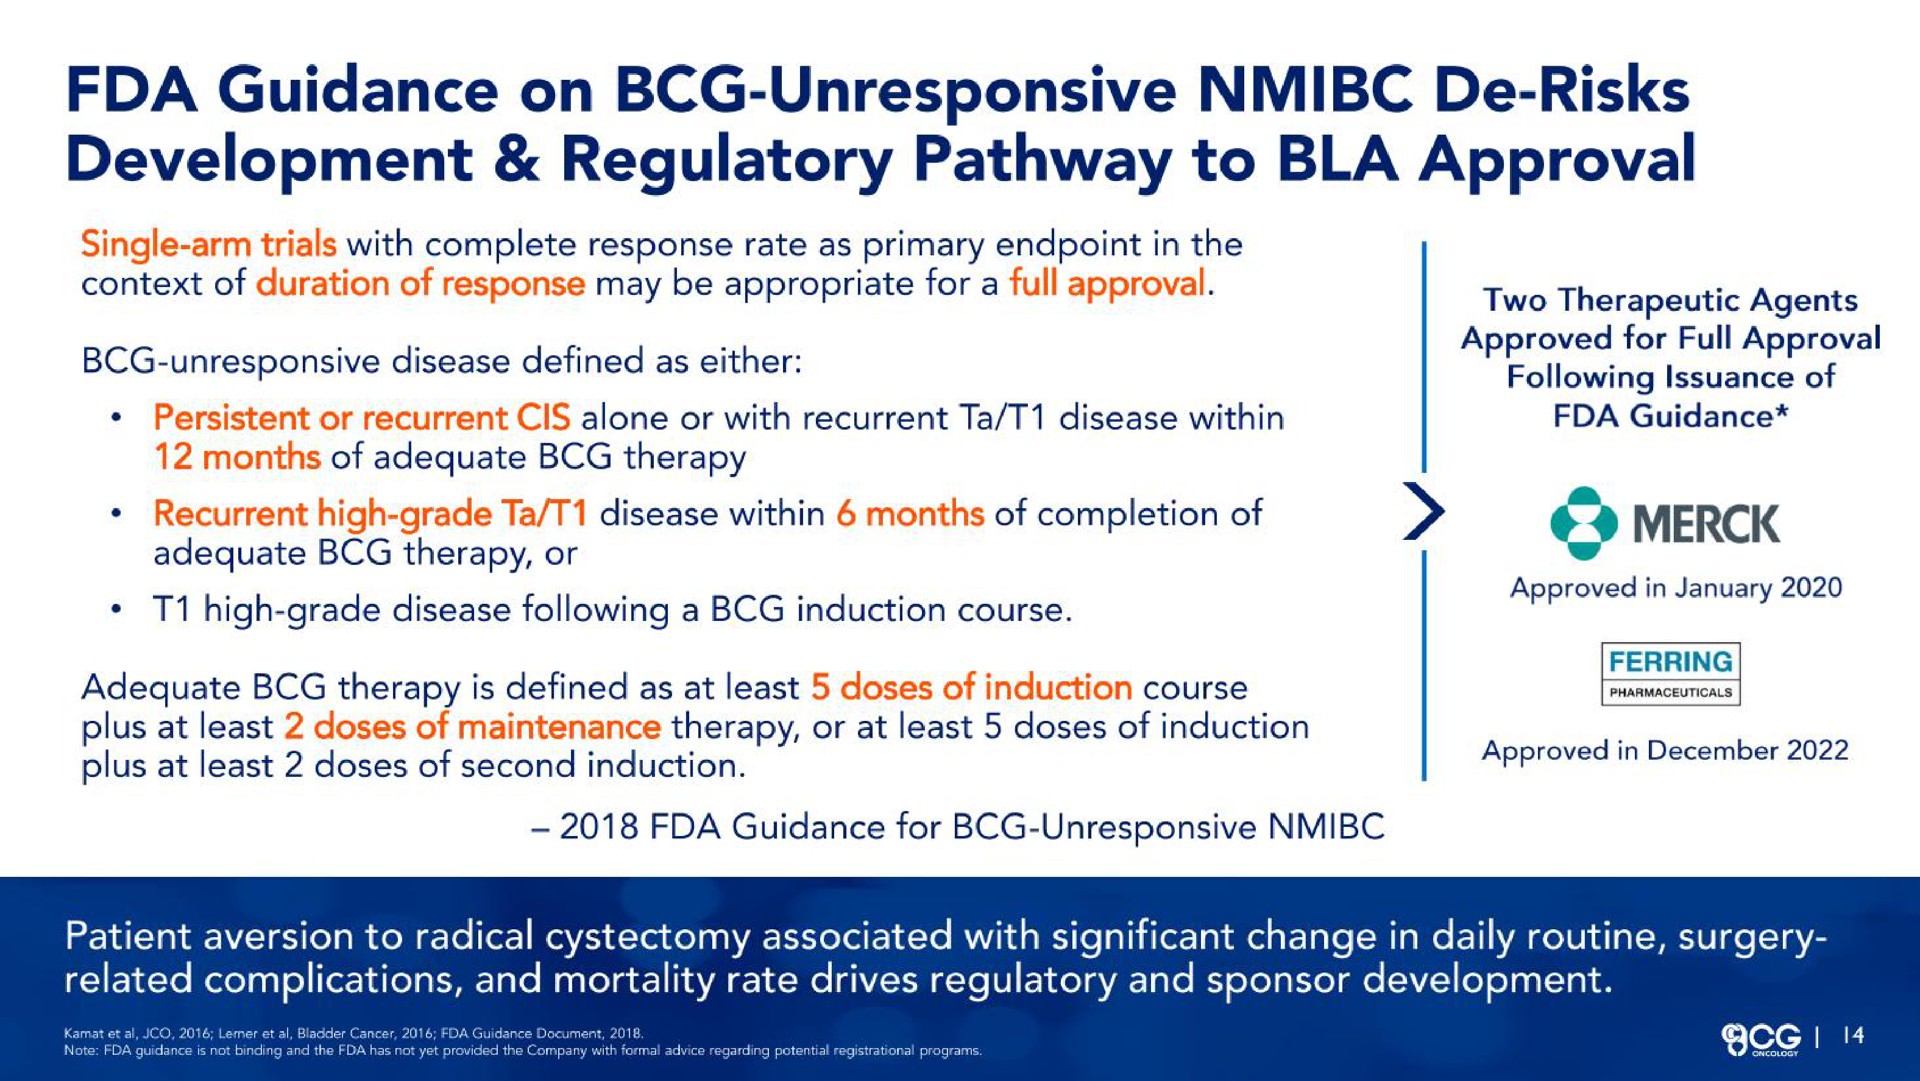 guidance on unresponsive risks development regulatory pathway to approval | CG Oncology